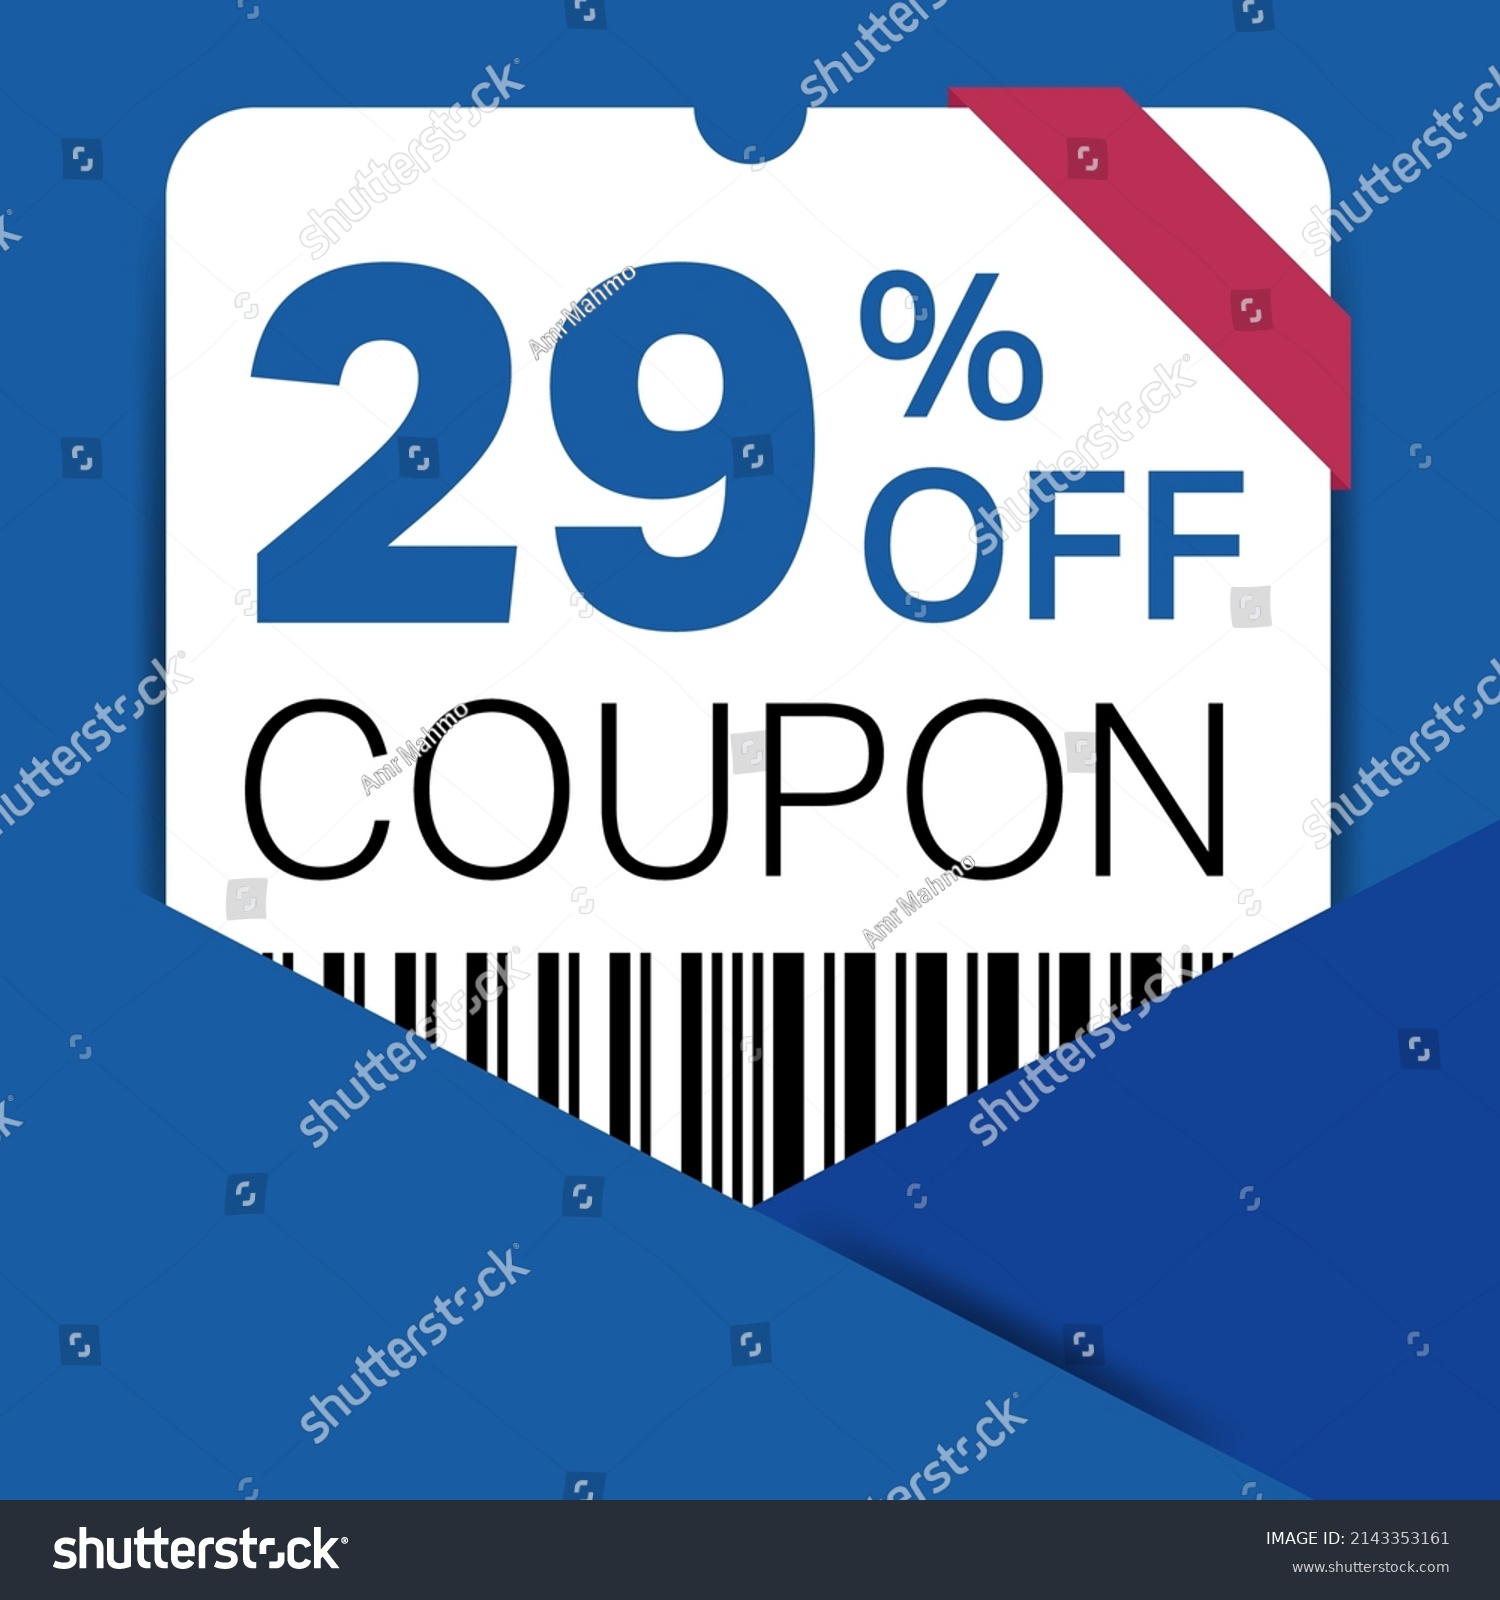 SVG of 29% Coupon promotion sale for a website, internet ads, social media gift 29% off discount voucher. Big sale and super sale coupon discount. Price Tag Mega Coupon discount with vector illustration. svg